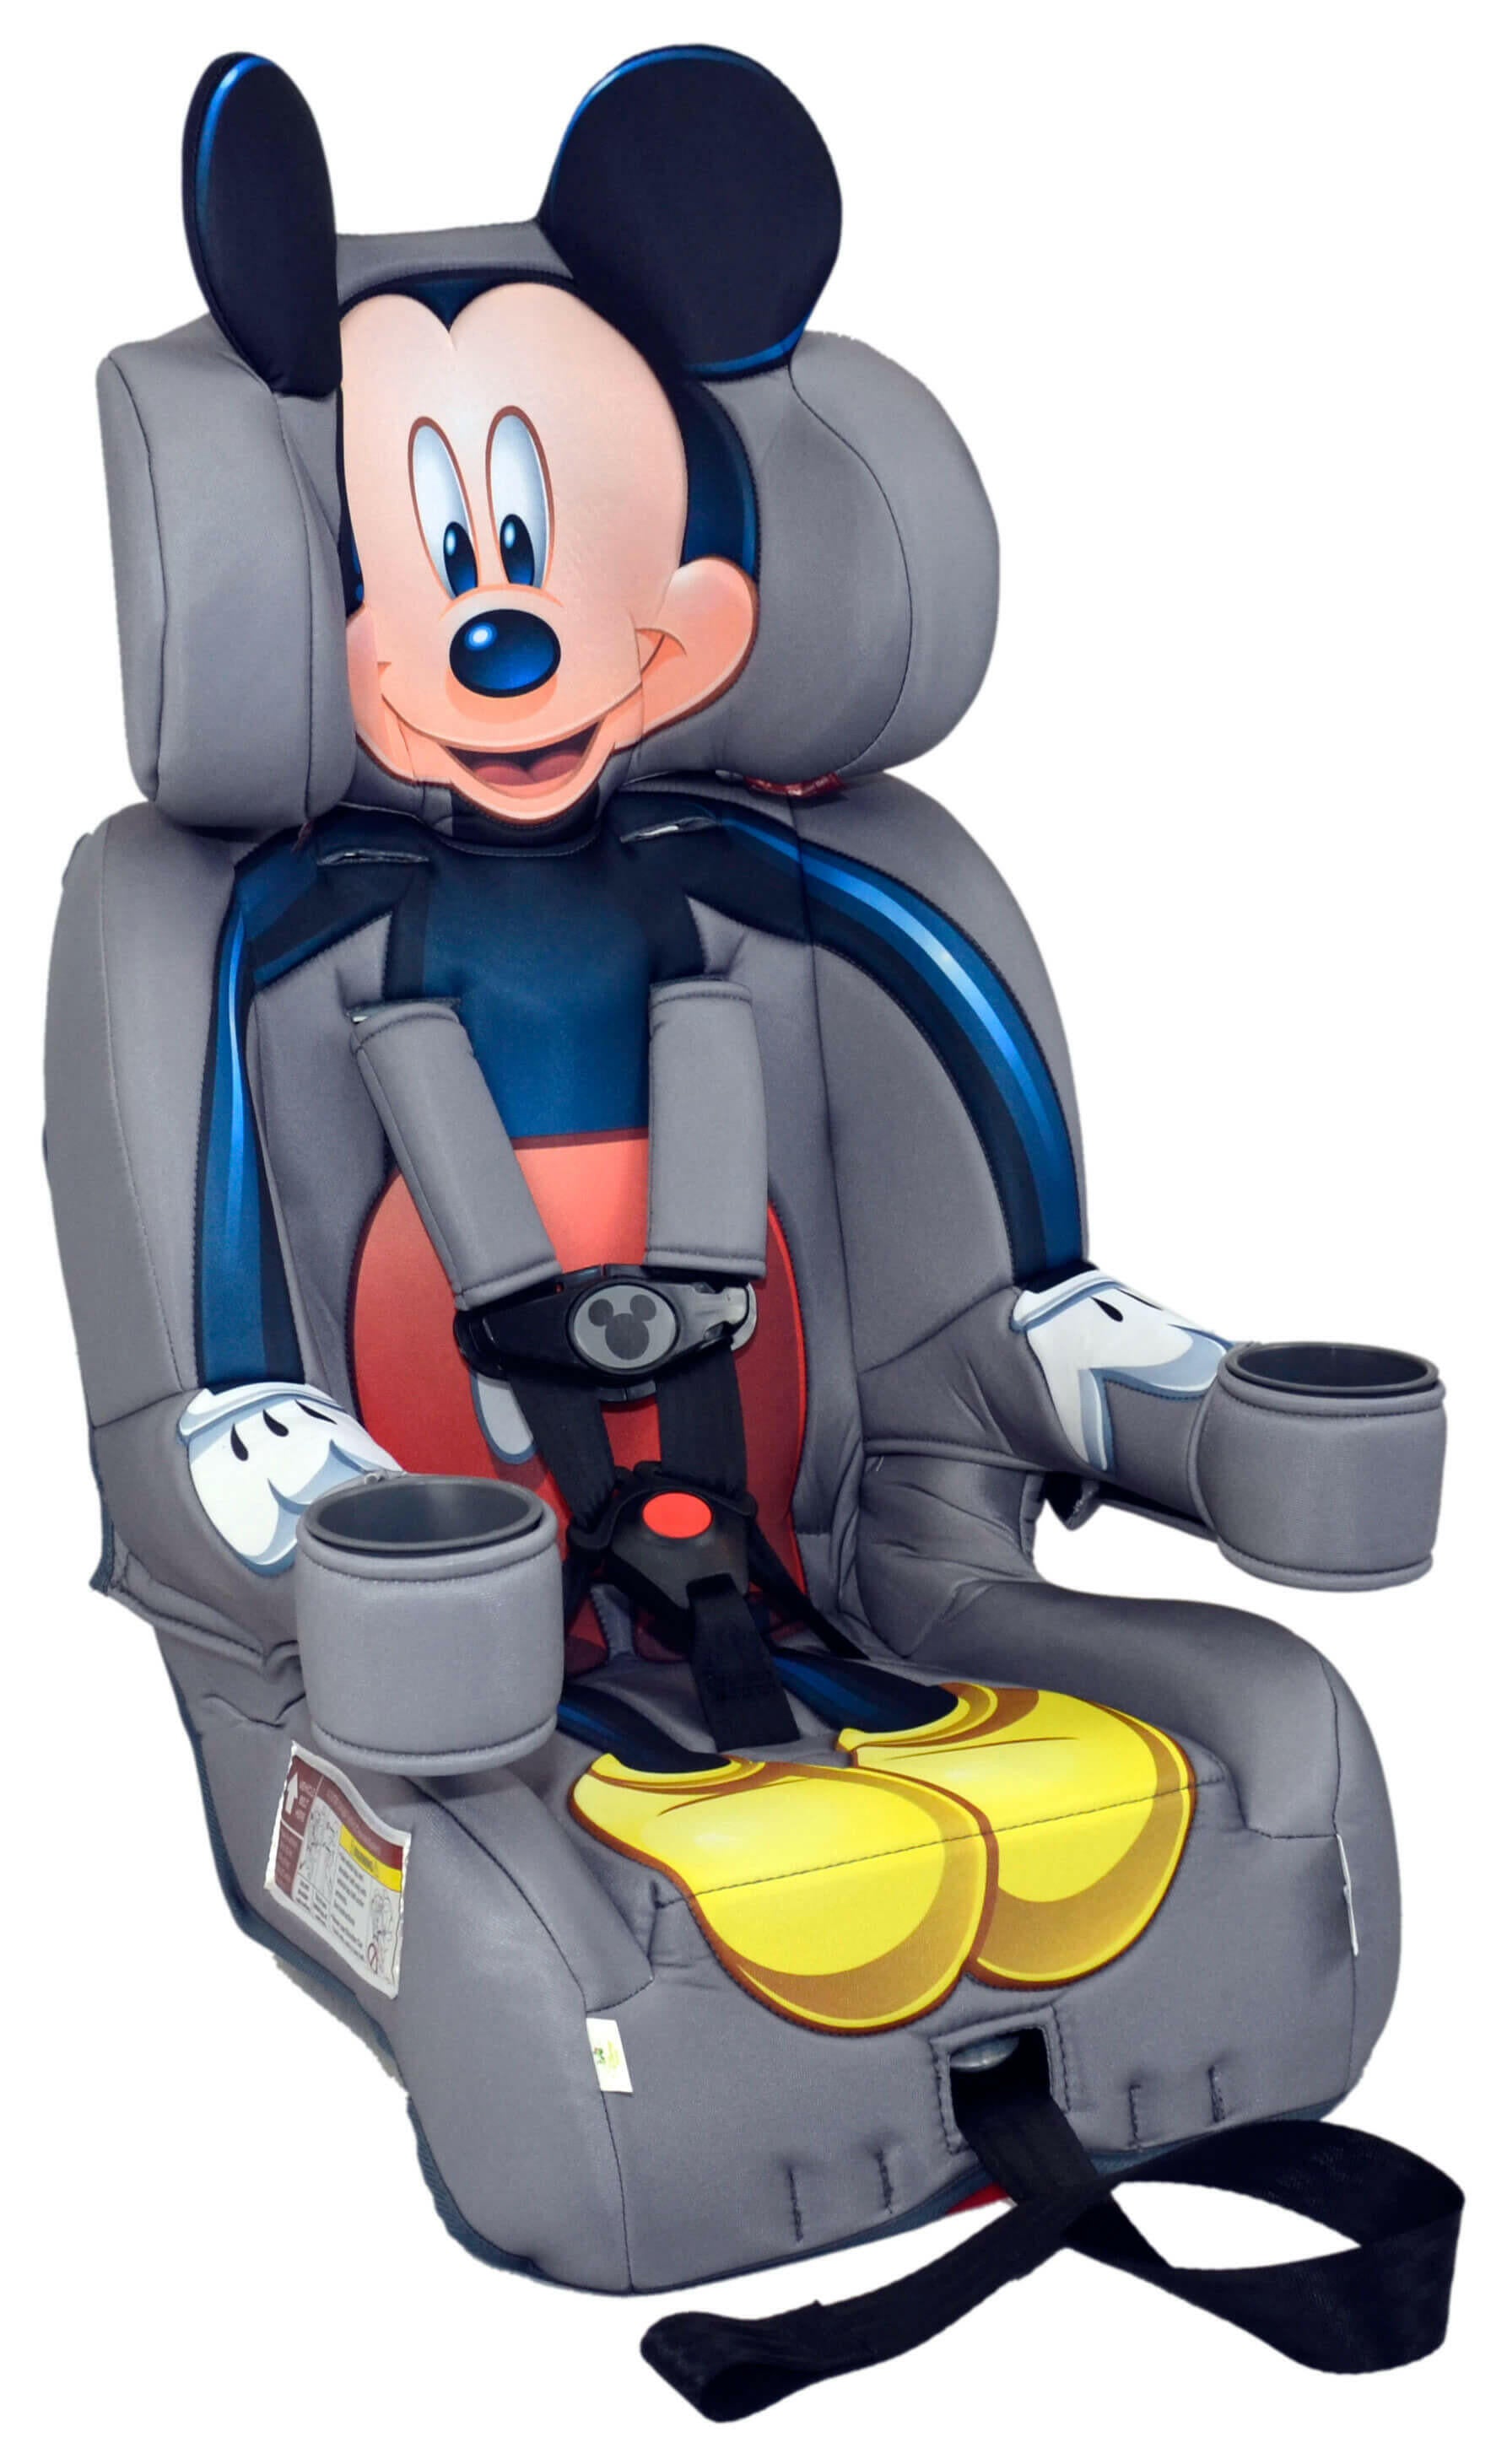 Kids Disney Mickey Mouse Adjustable Harness Booster Car Seat - Kids Eye Candy